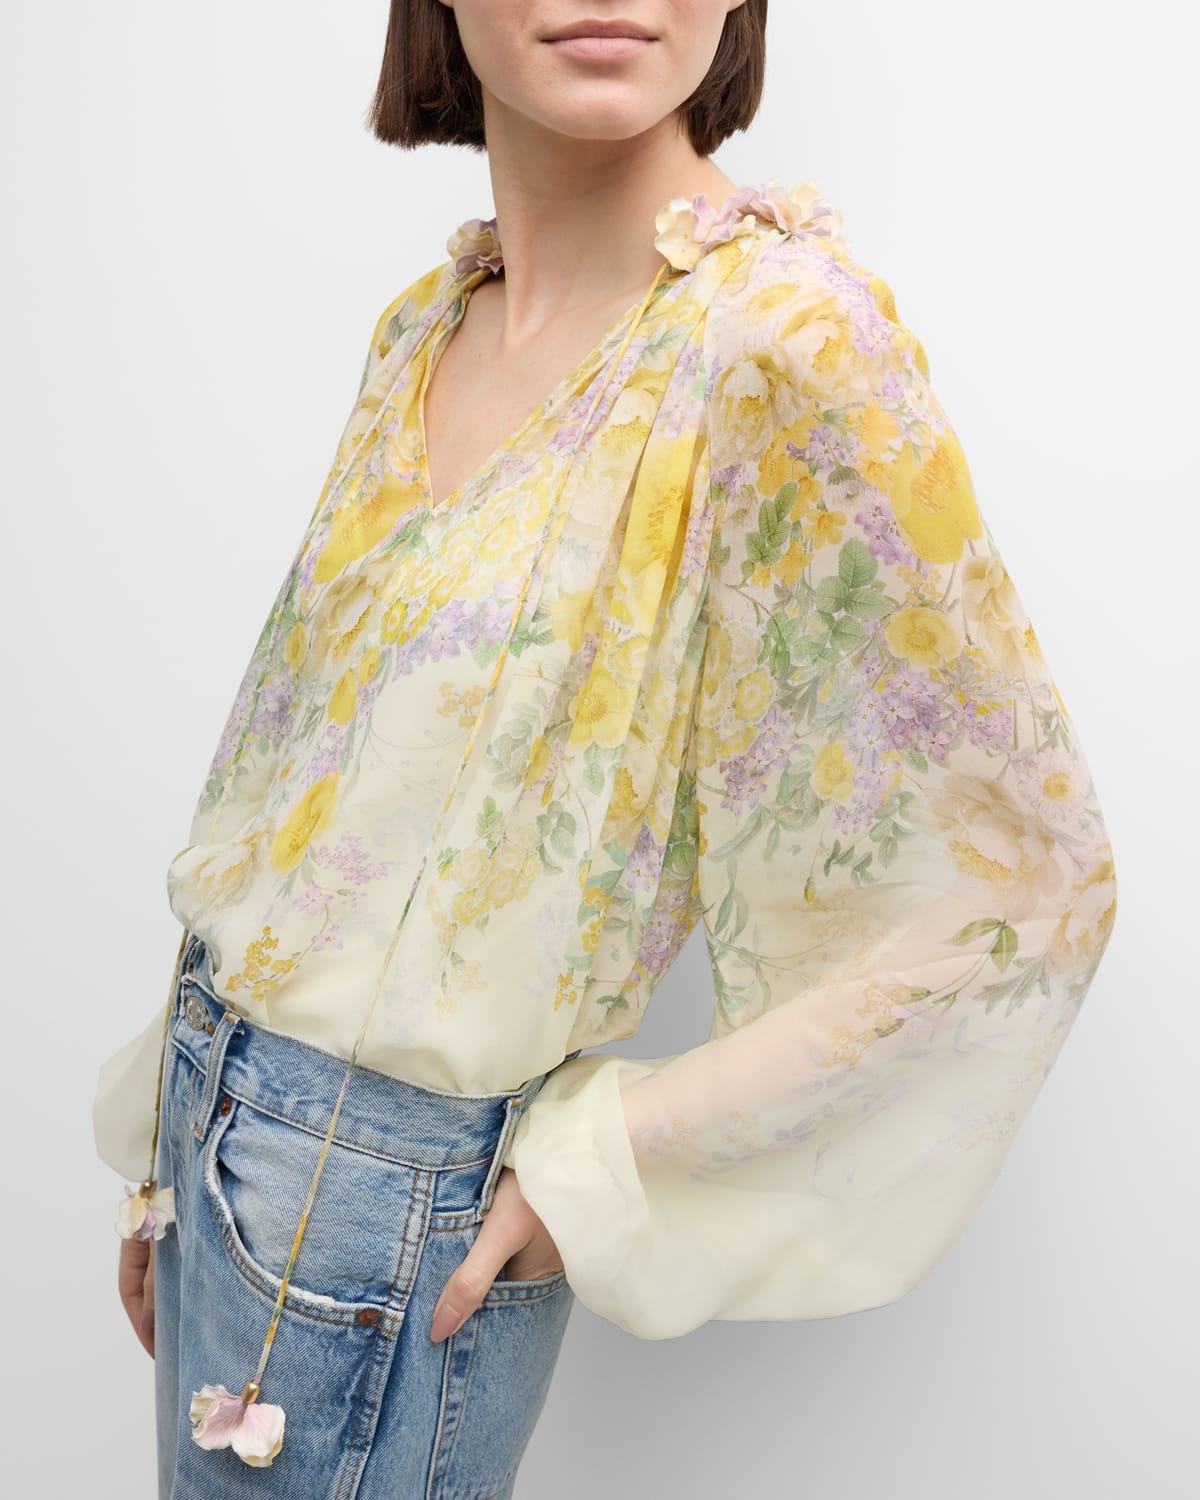 Harmony Floral Billow Blouse - 7